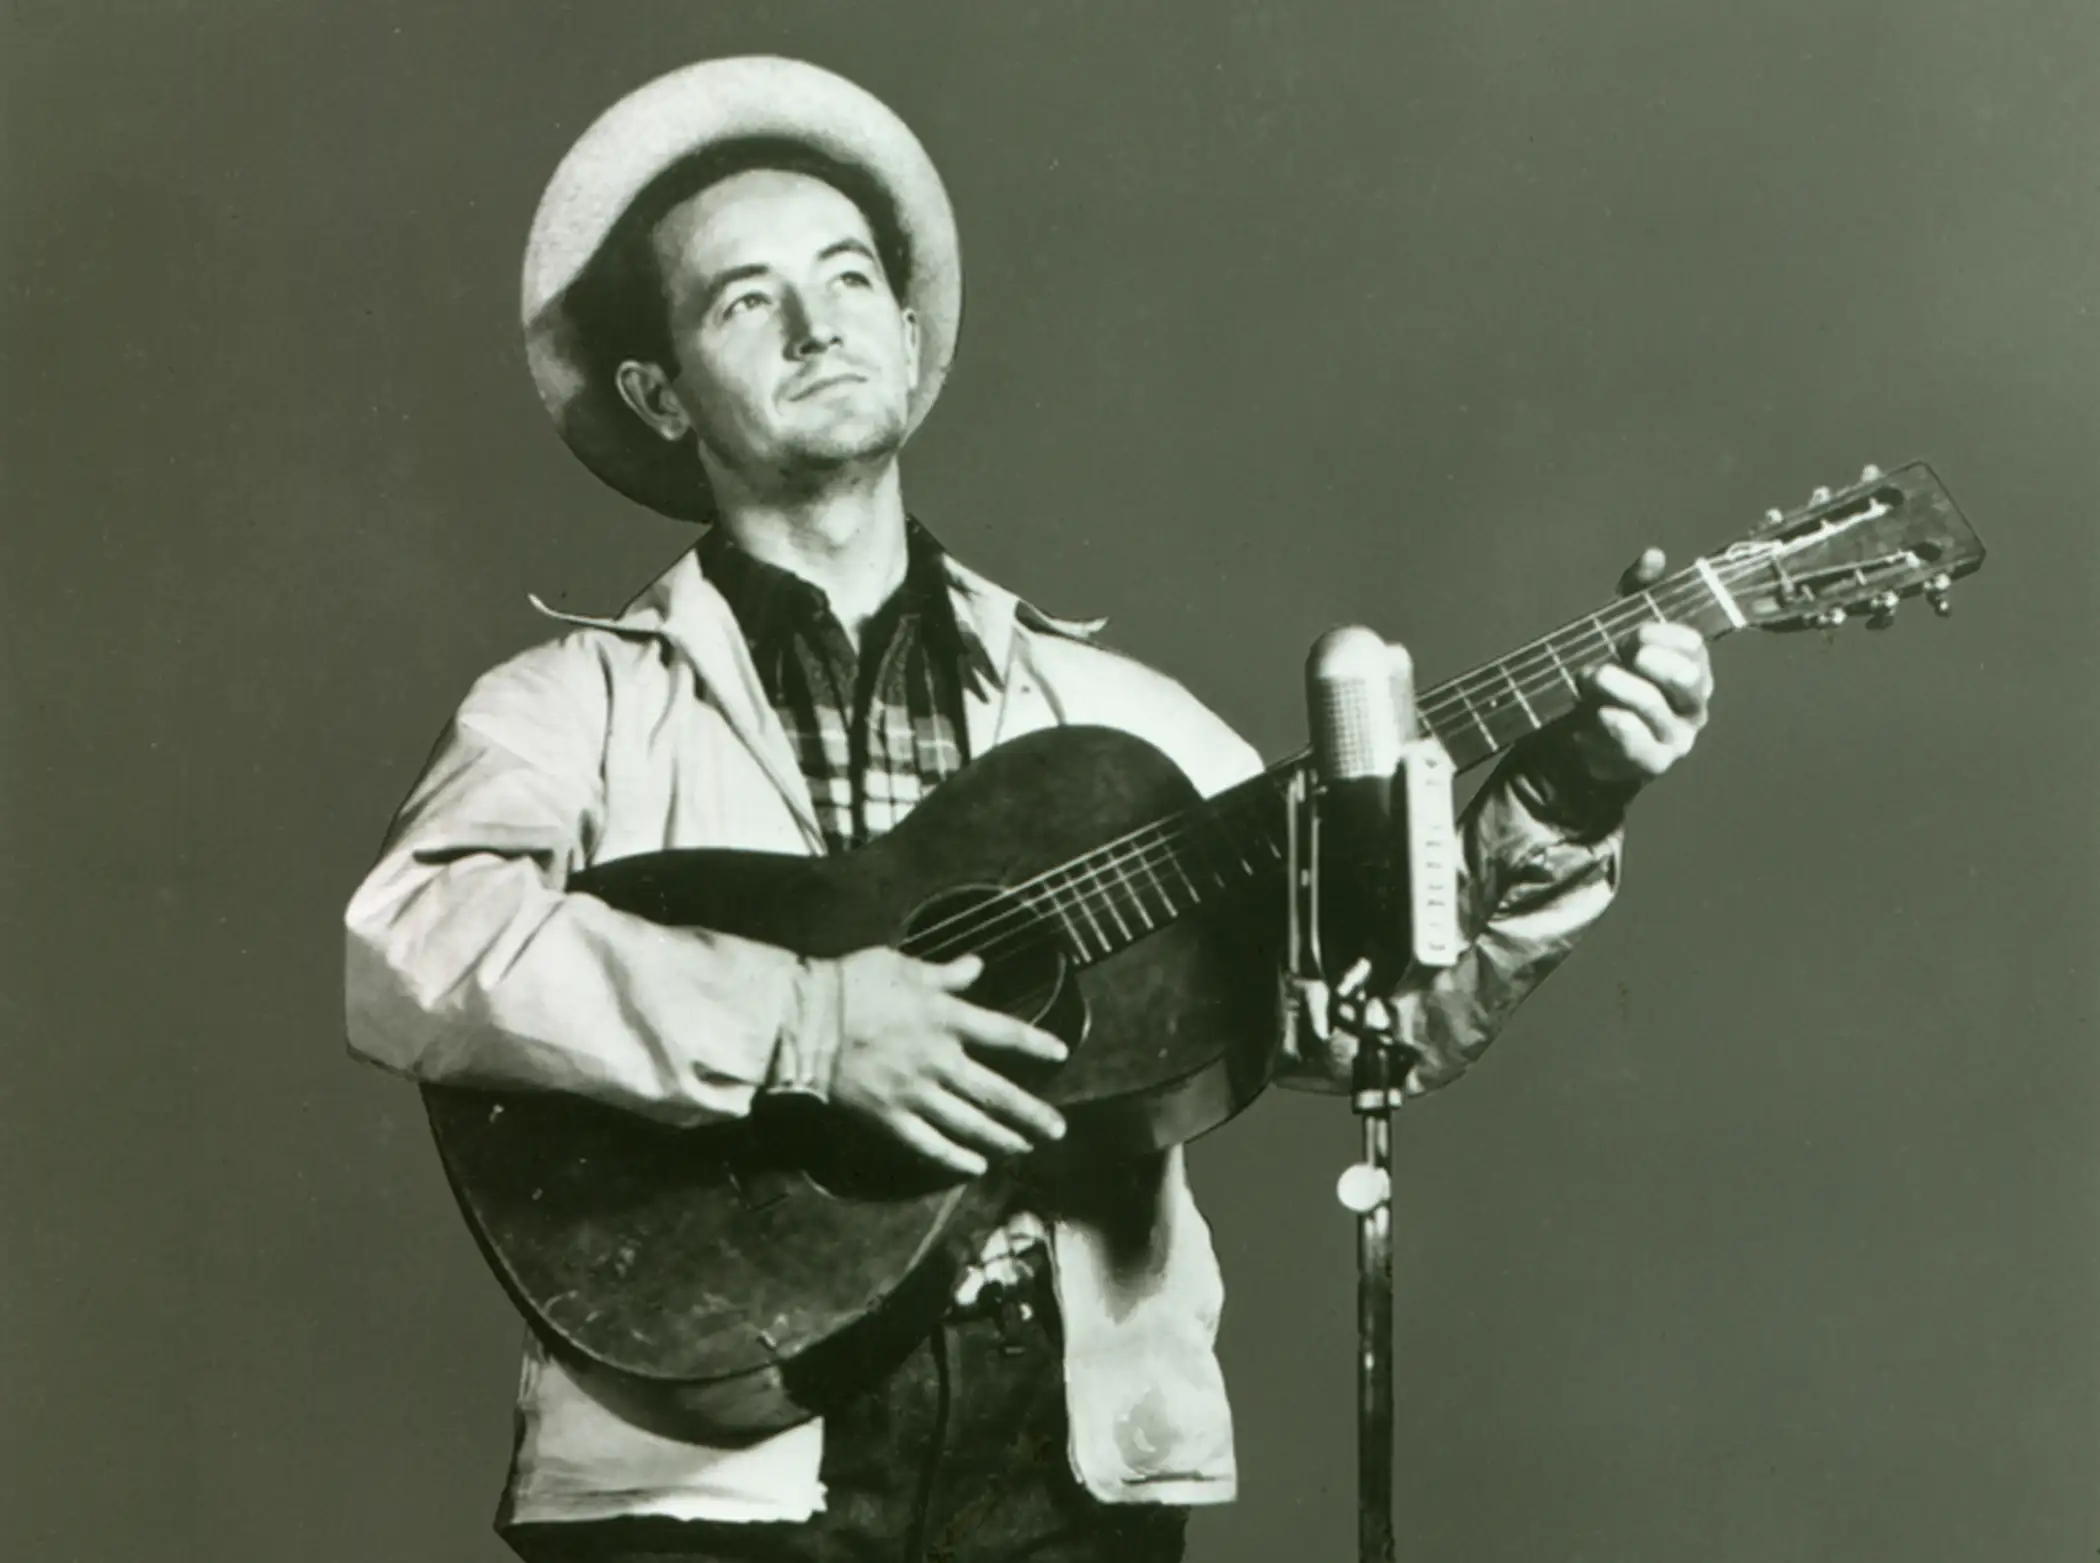 Woody Guthrie performing on “Back Where I Come From” radio show, WABC-CBS. New York City, 1940.